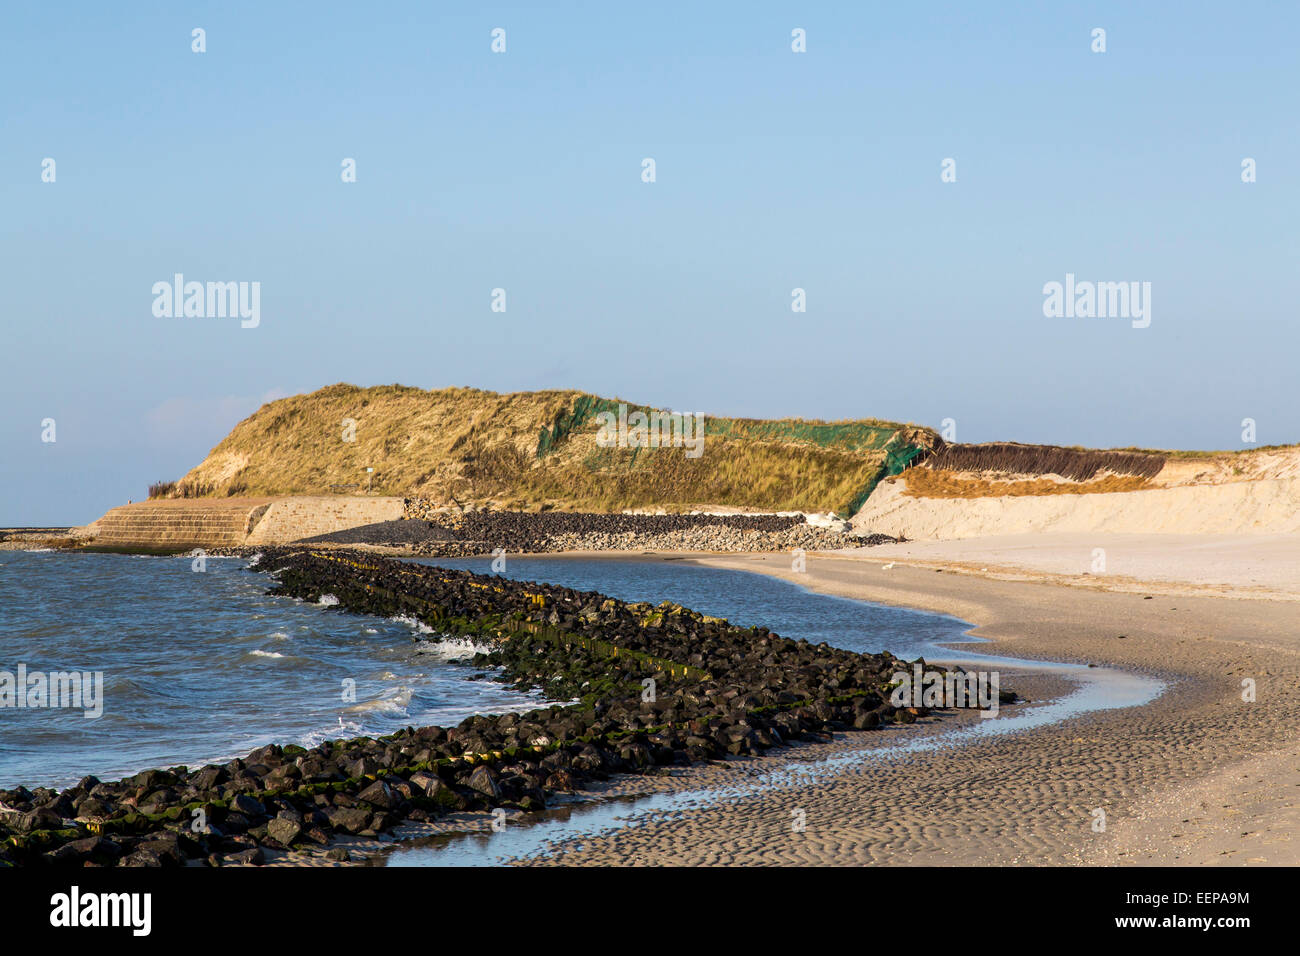 Coastal protection project on the west shore of North sea island Spiekeroog, Germany, to protect the dunes and beach from waves Stock Photo